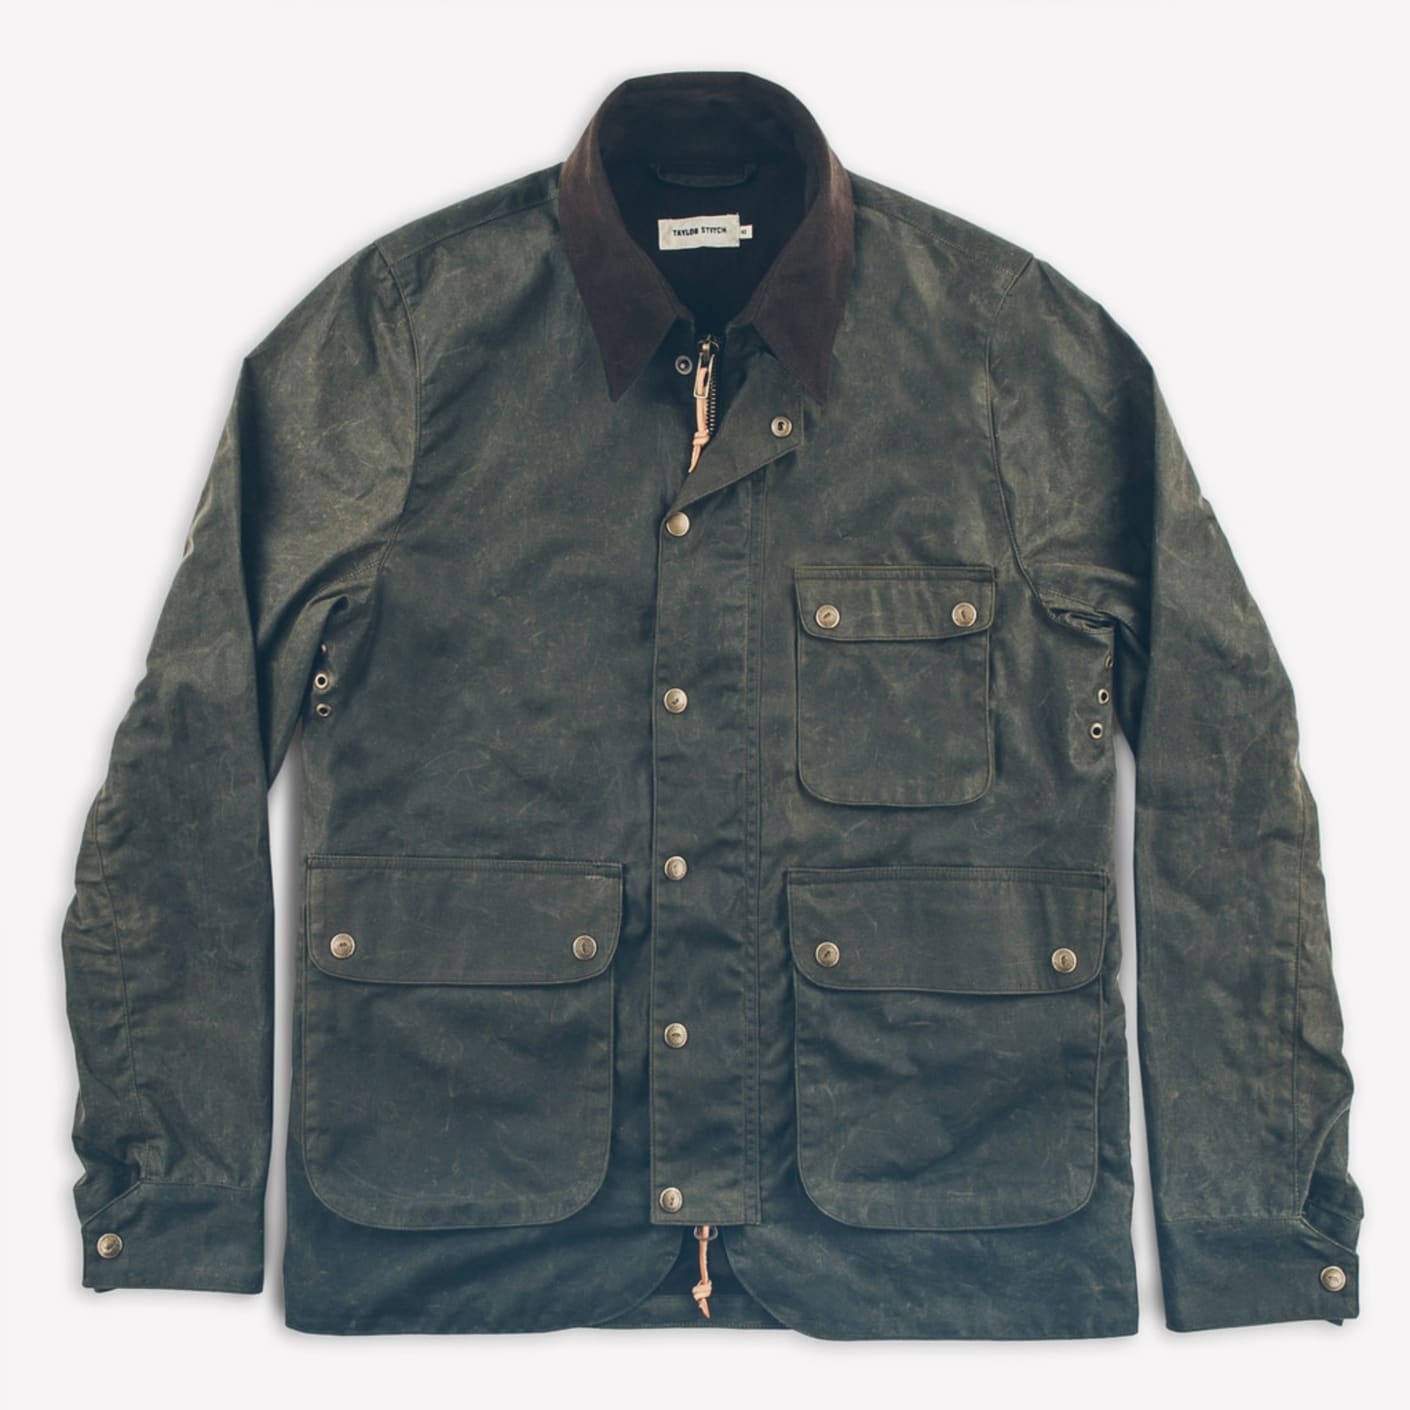 Taylor Stitch The Rover Jacket | Bespoke Post